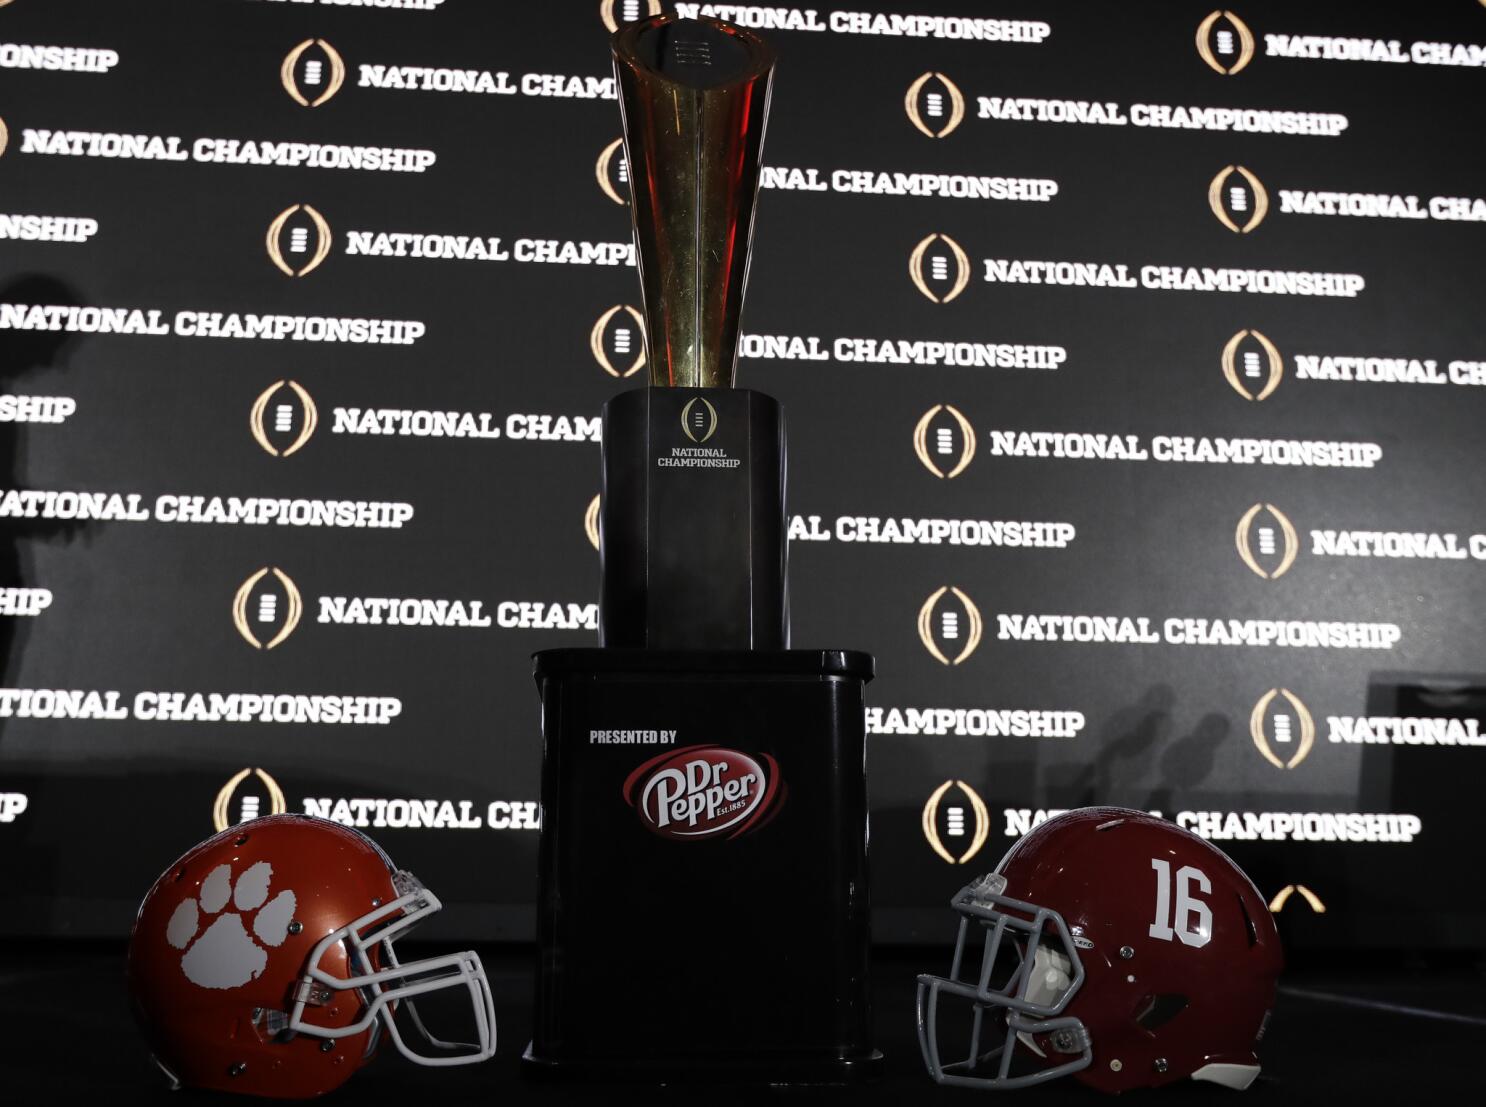 What time and on what channel is the Alabama-Clemson national